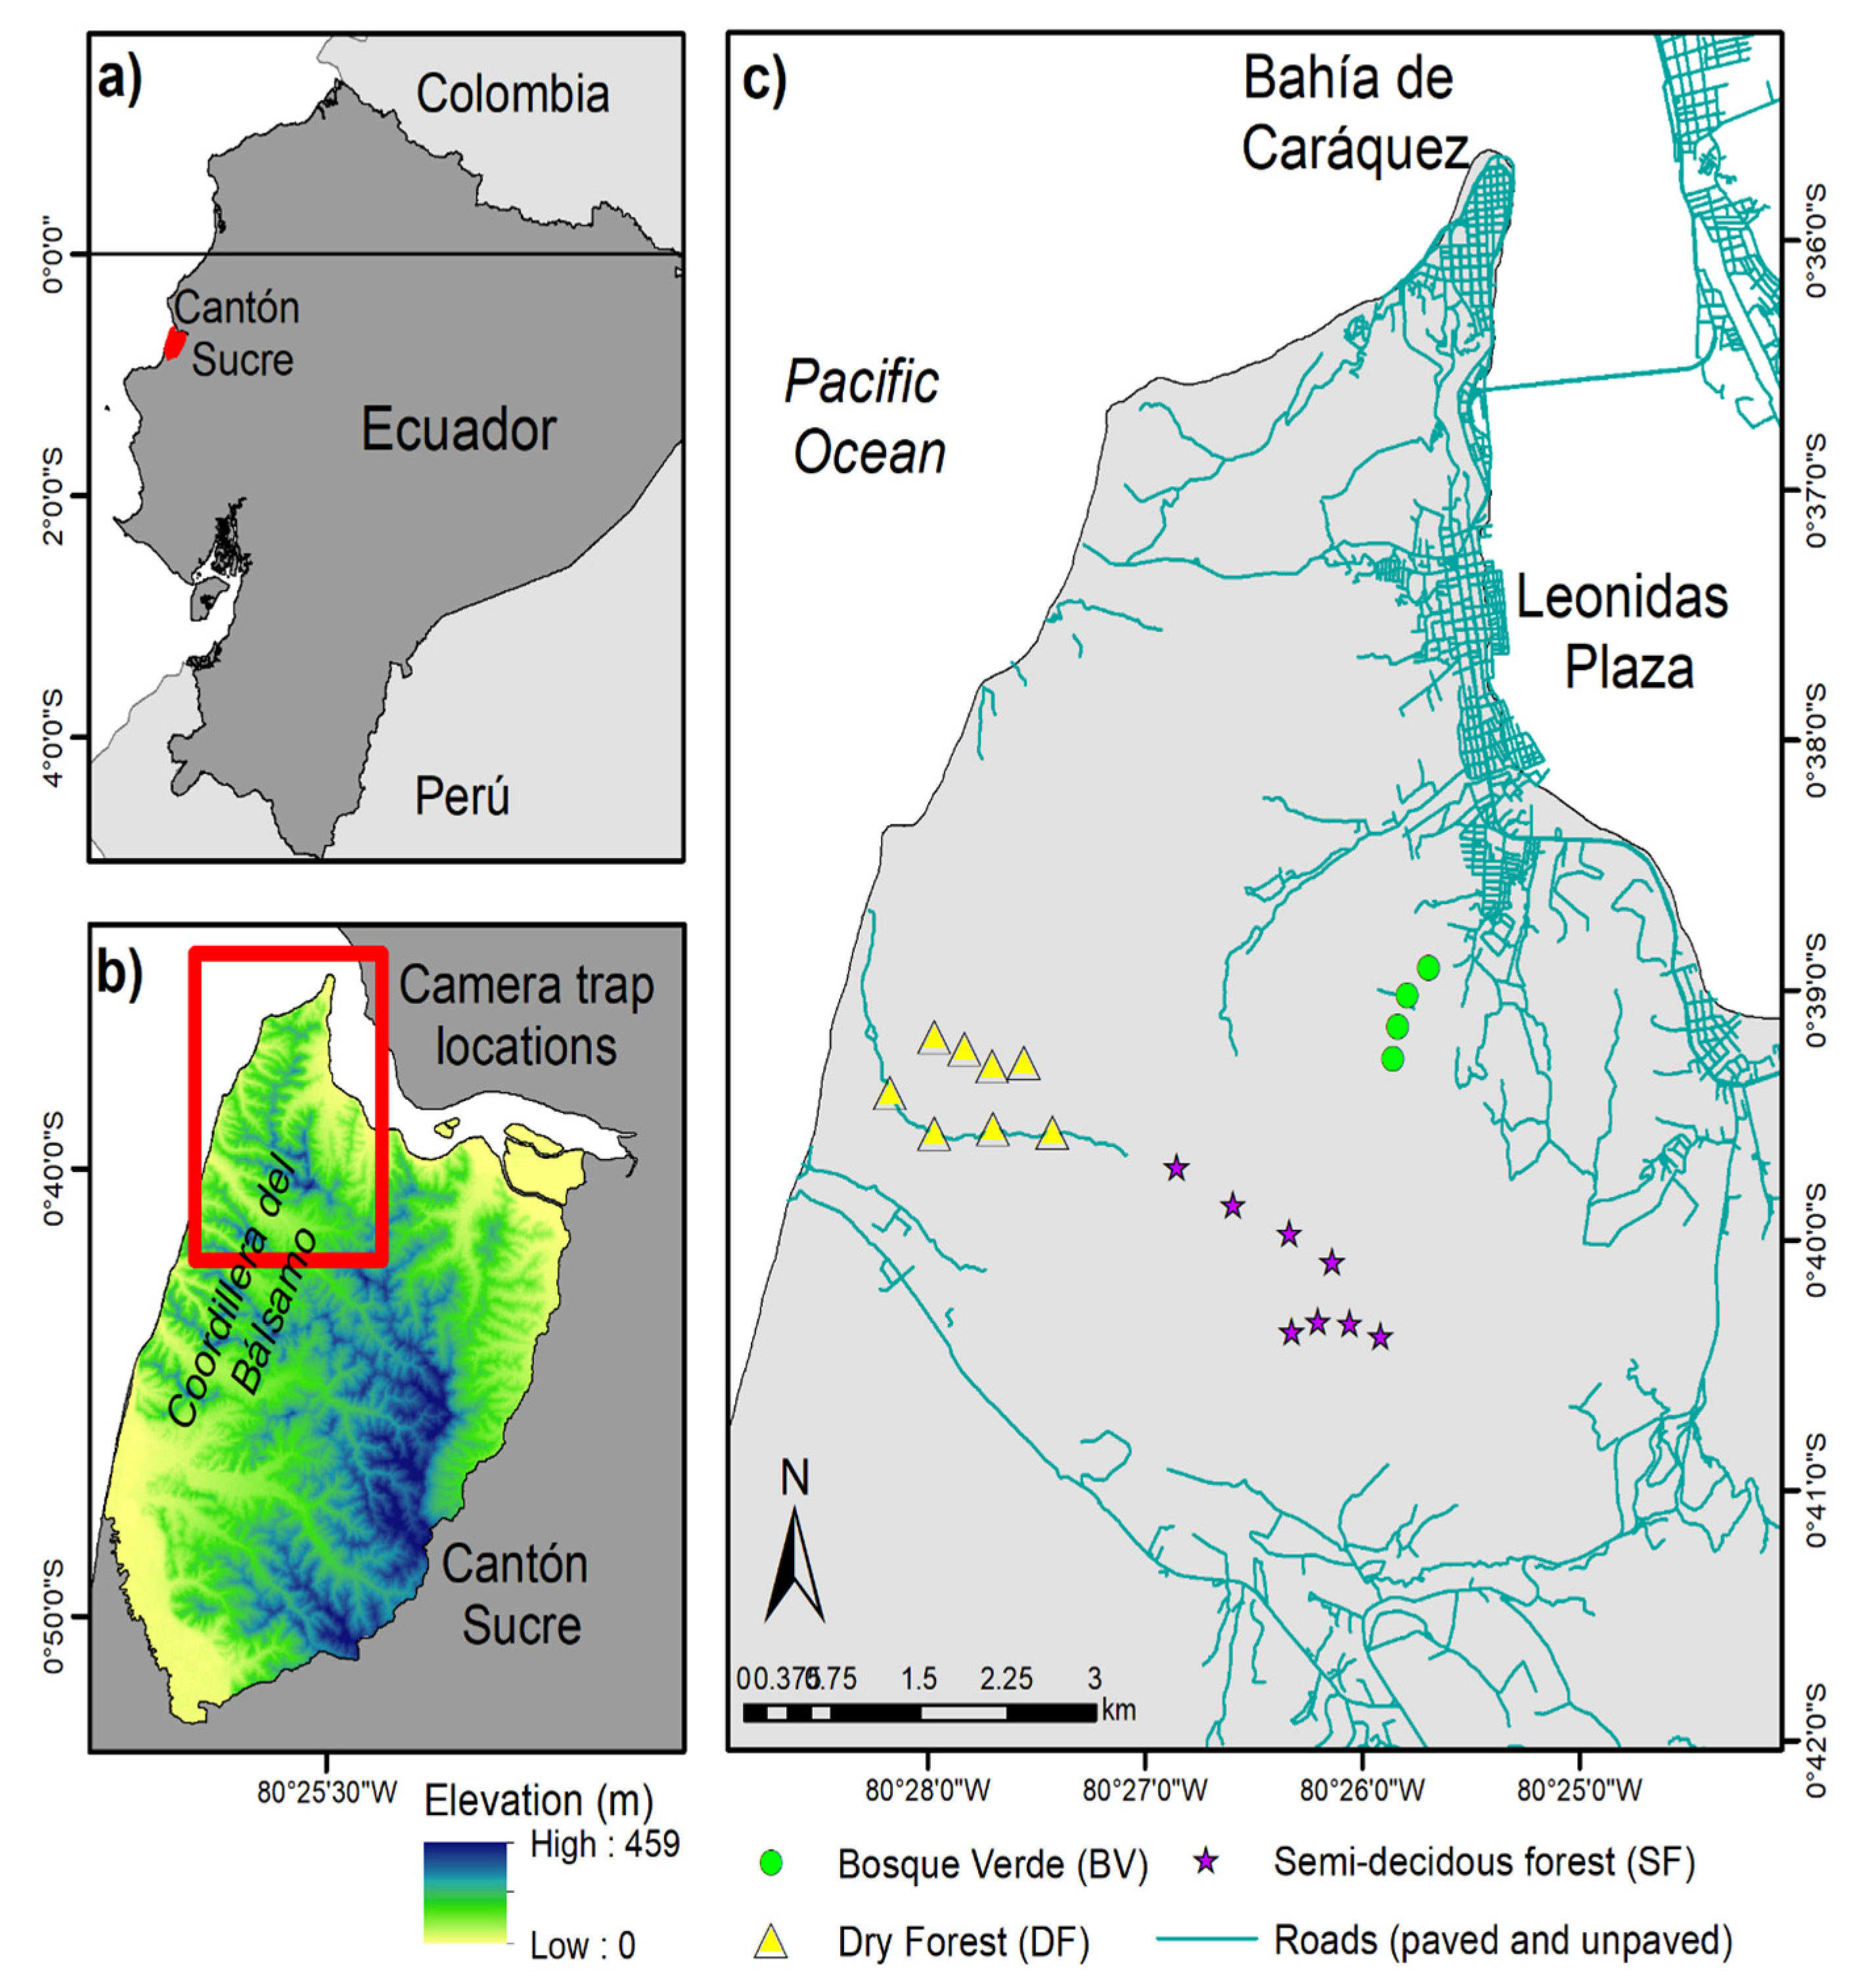 Remote Sensing | Free Full-Text | Landscape Structure and Seasonality:  Effects on Wildlife Species Richness and Occupancy in a Fragmented Dry  Forest in Coastal Ecuador | HTML